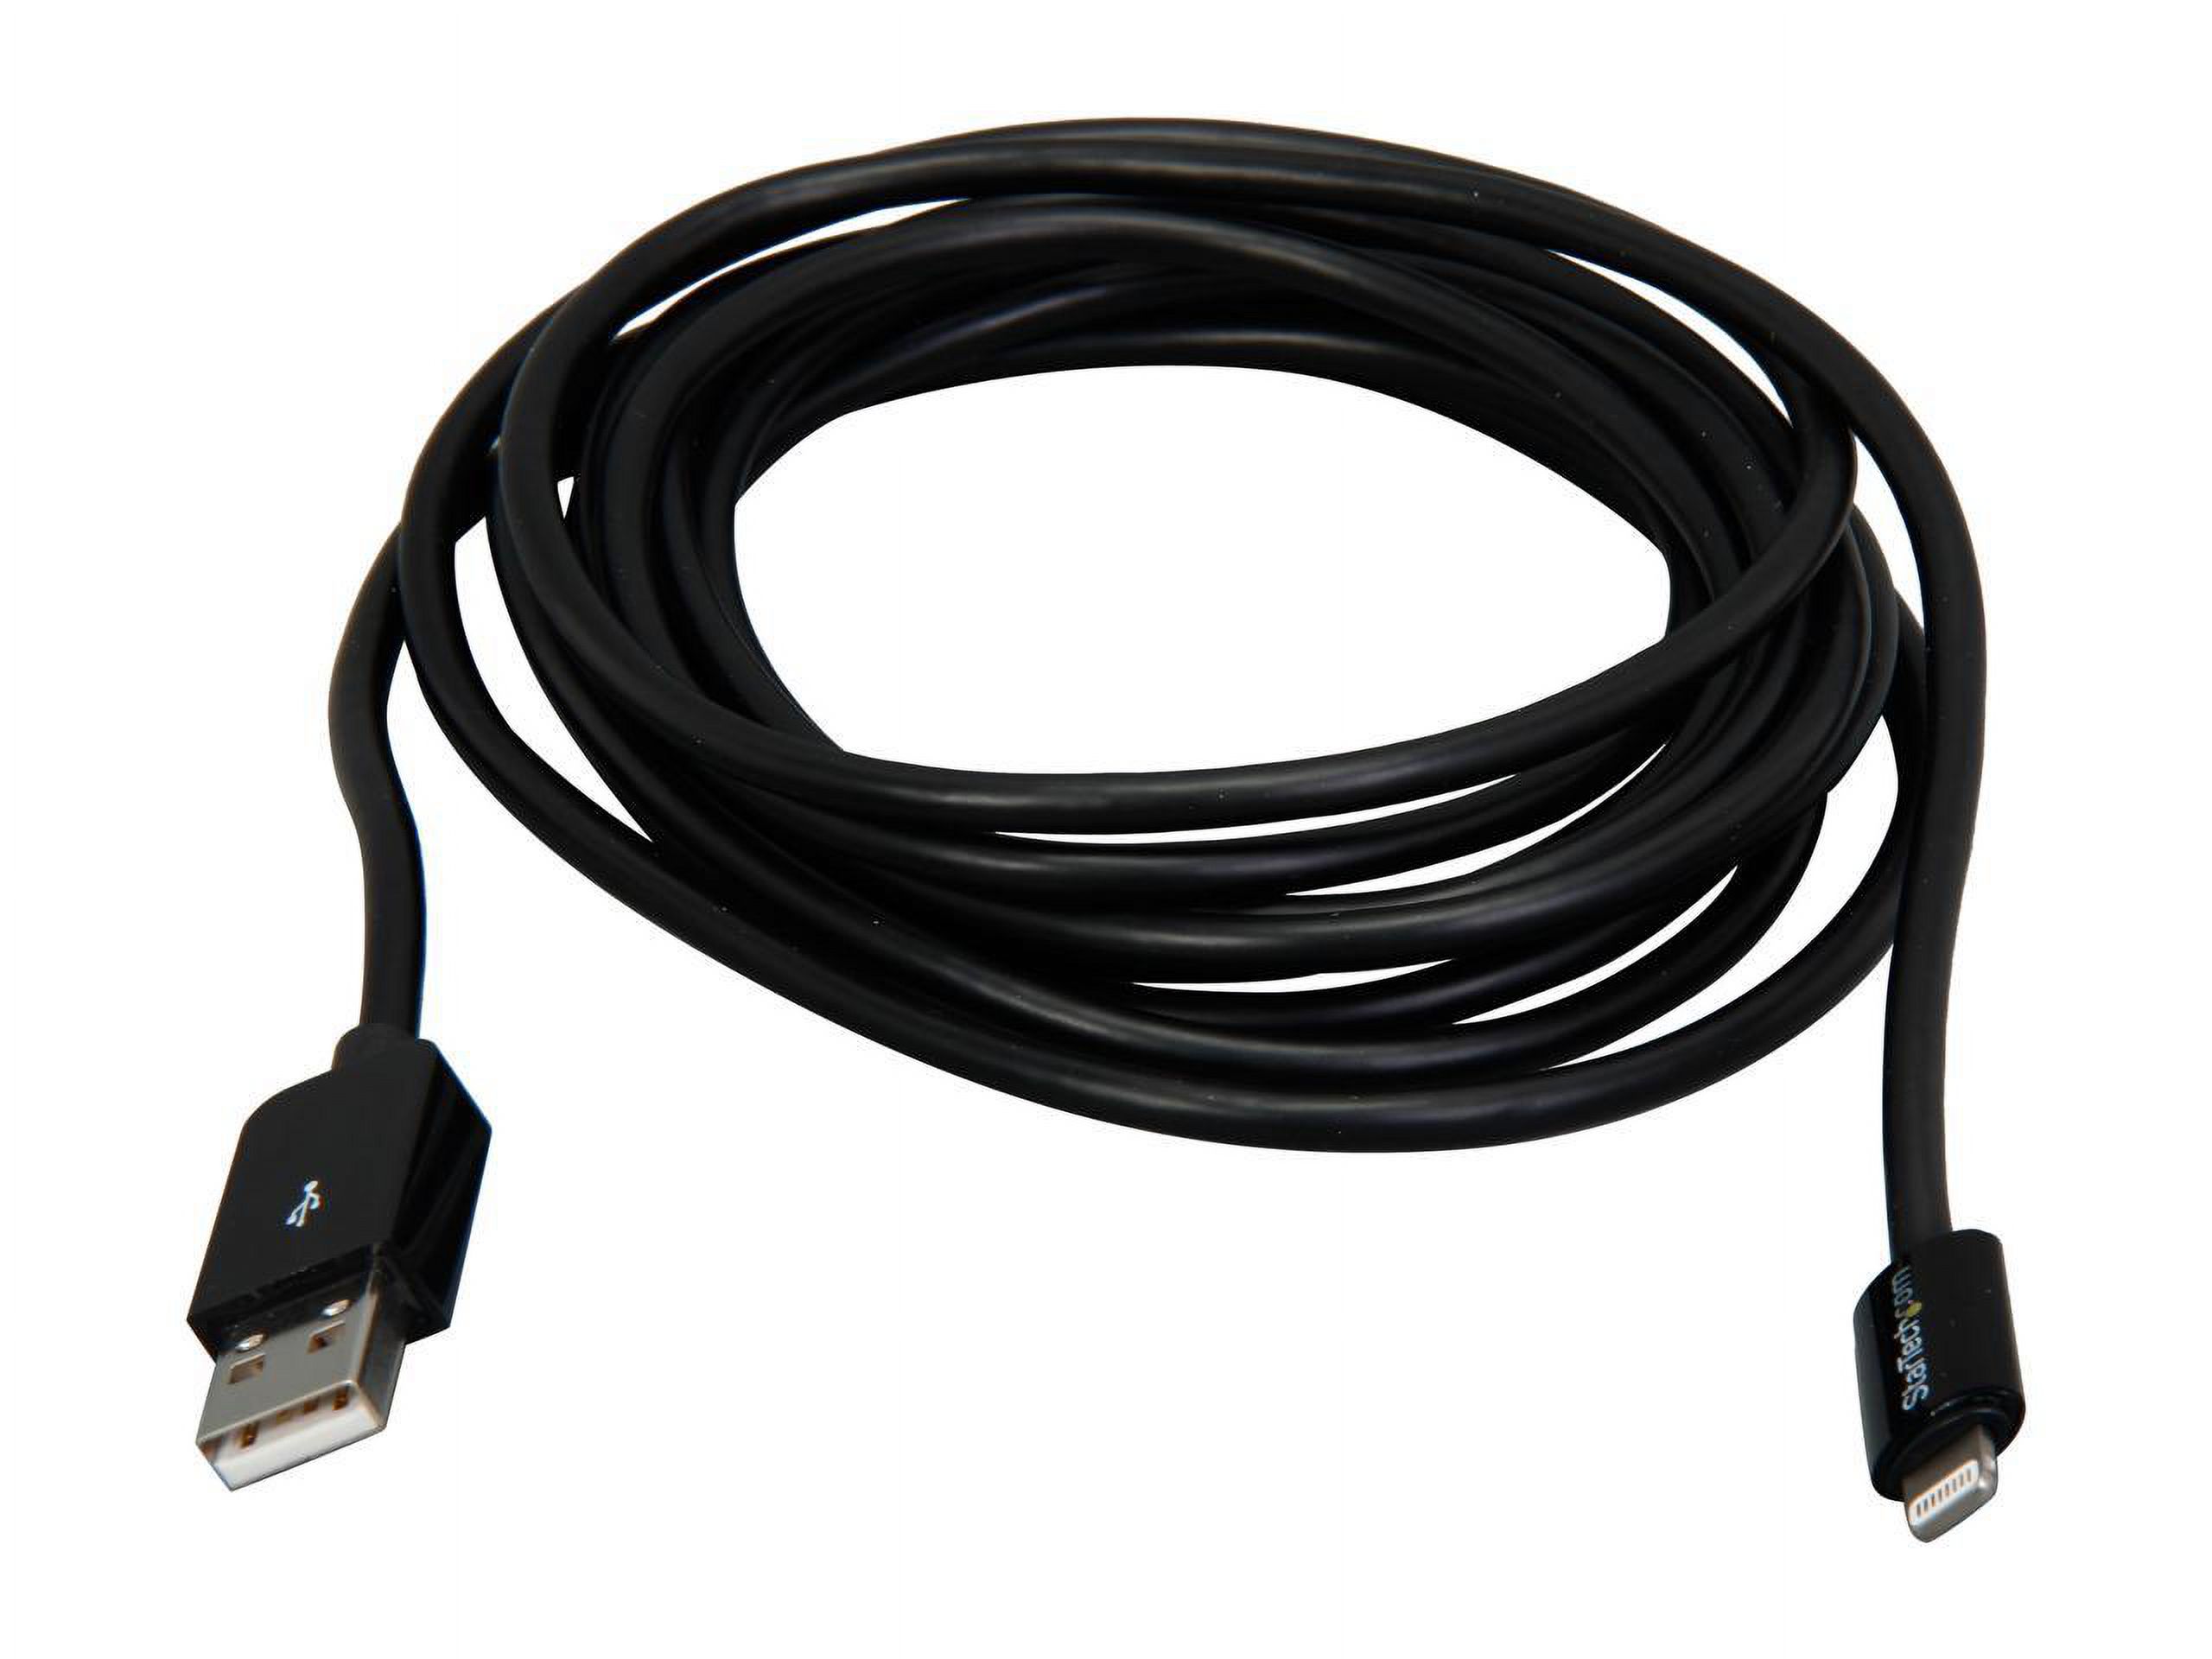 StarTech.com USBLT3MB Black 3m (10ft) Long Black Apple 8-pin Lightning Connector to USB Cable for iPhone / iPod / iPad - image 2 of 3